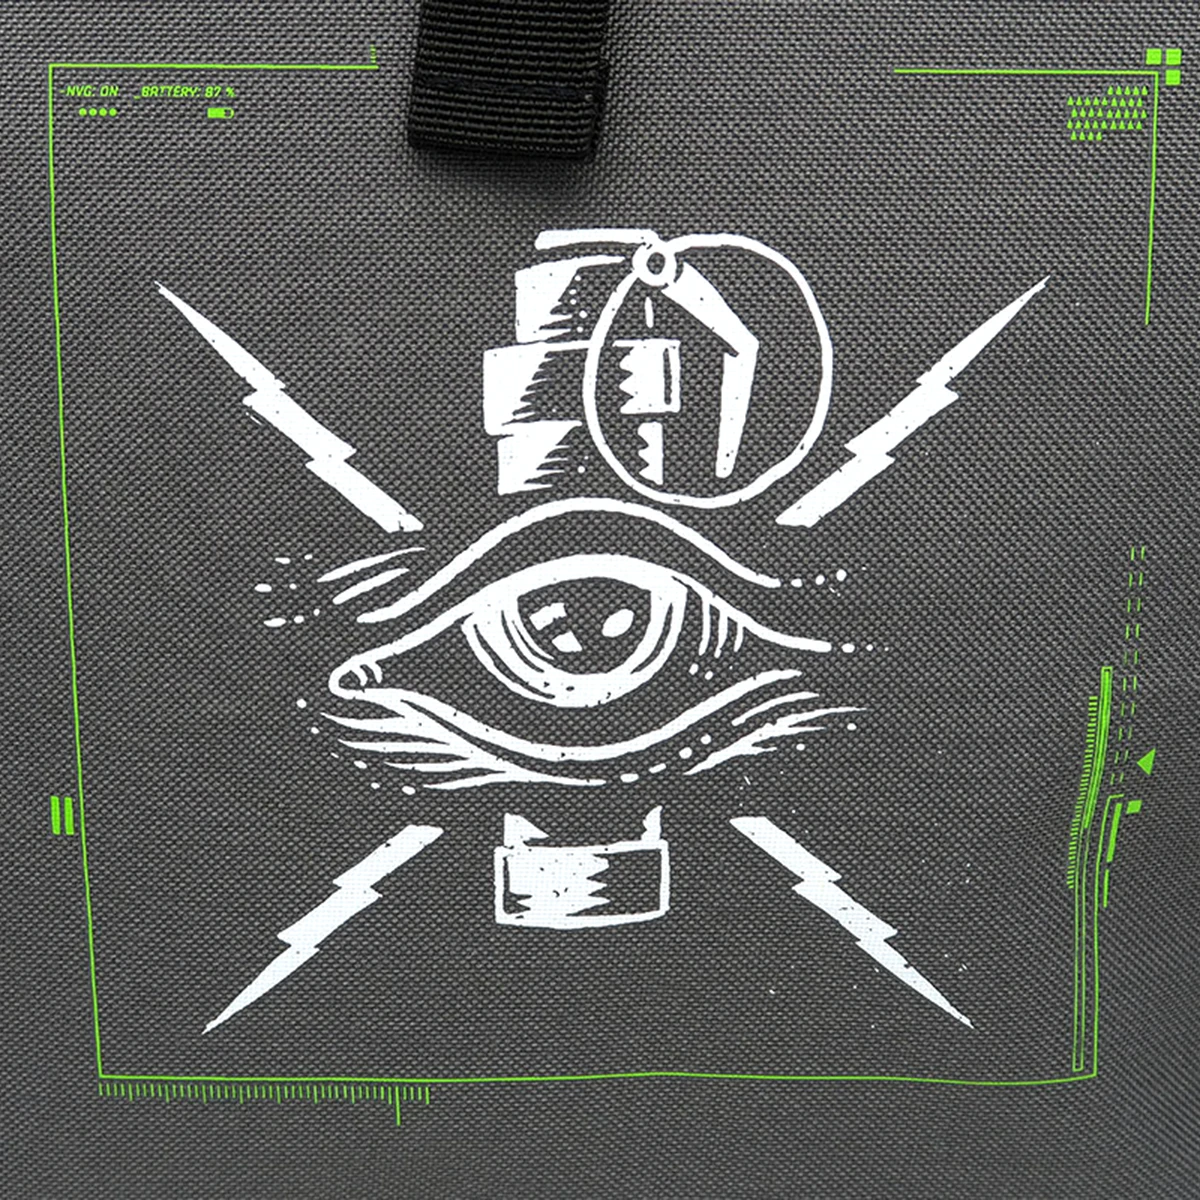 Call of Duty Rolltop Backpack "Blind" Grey Image 3